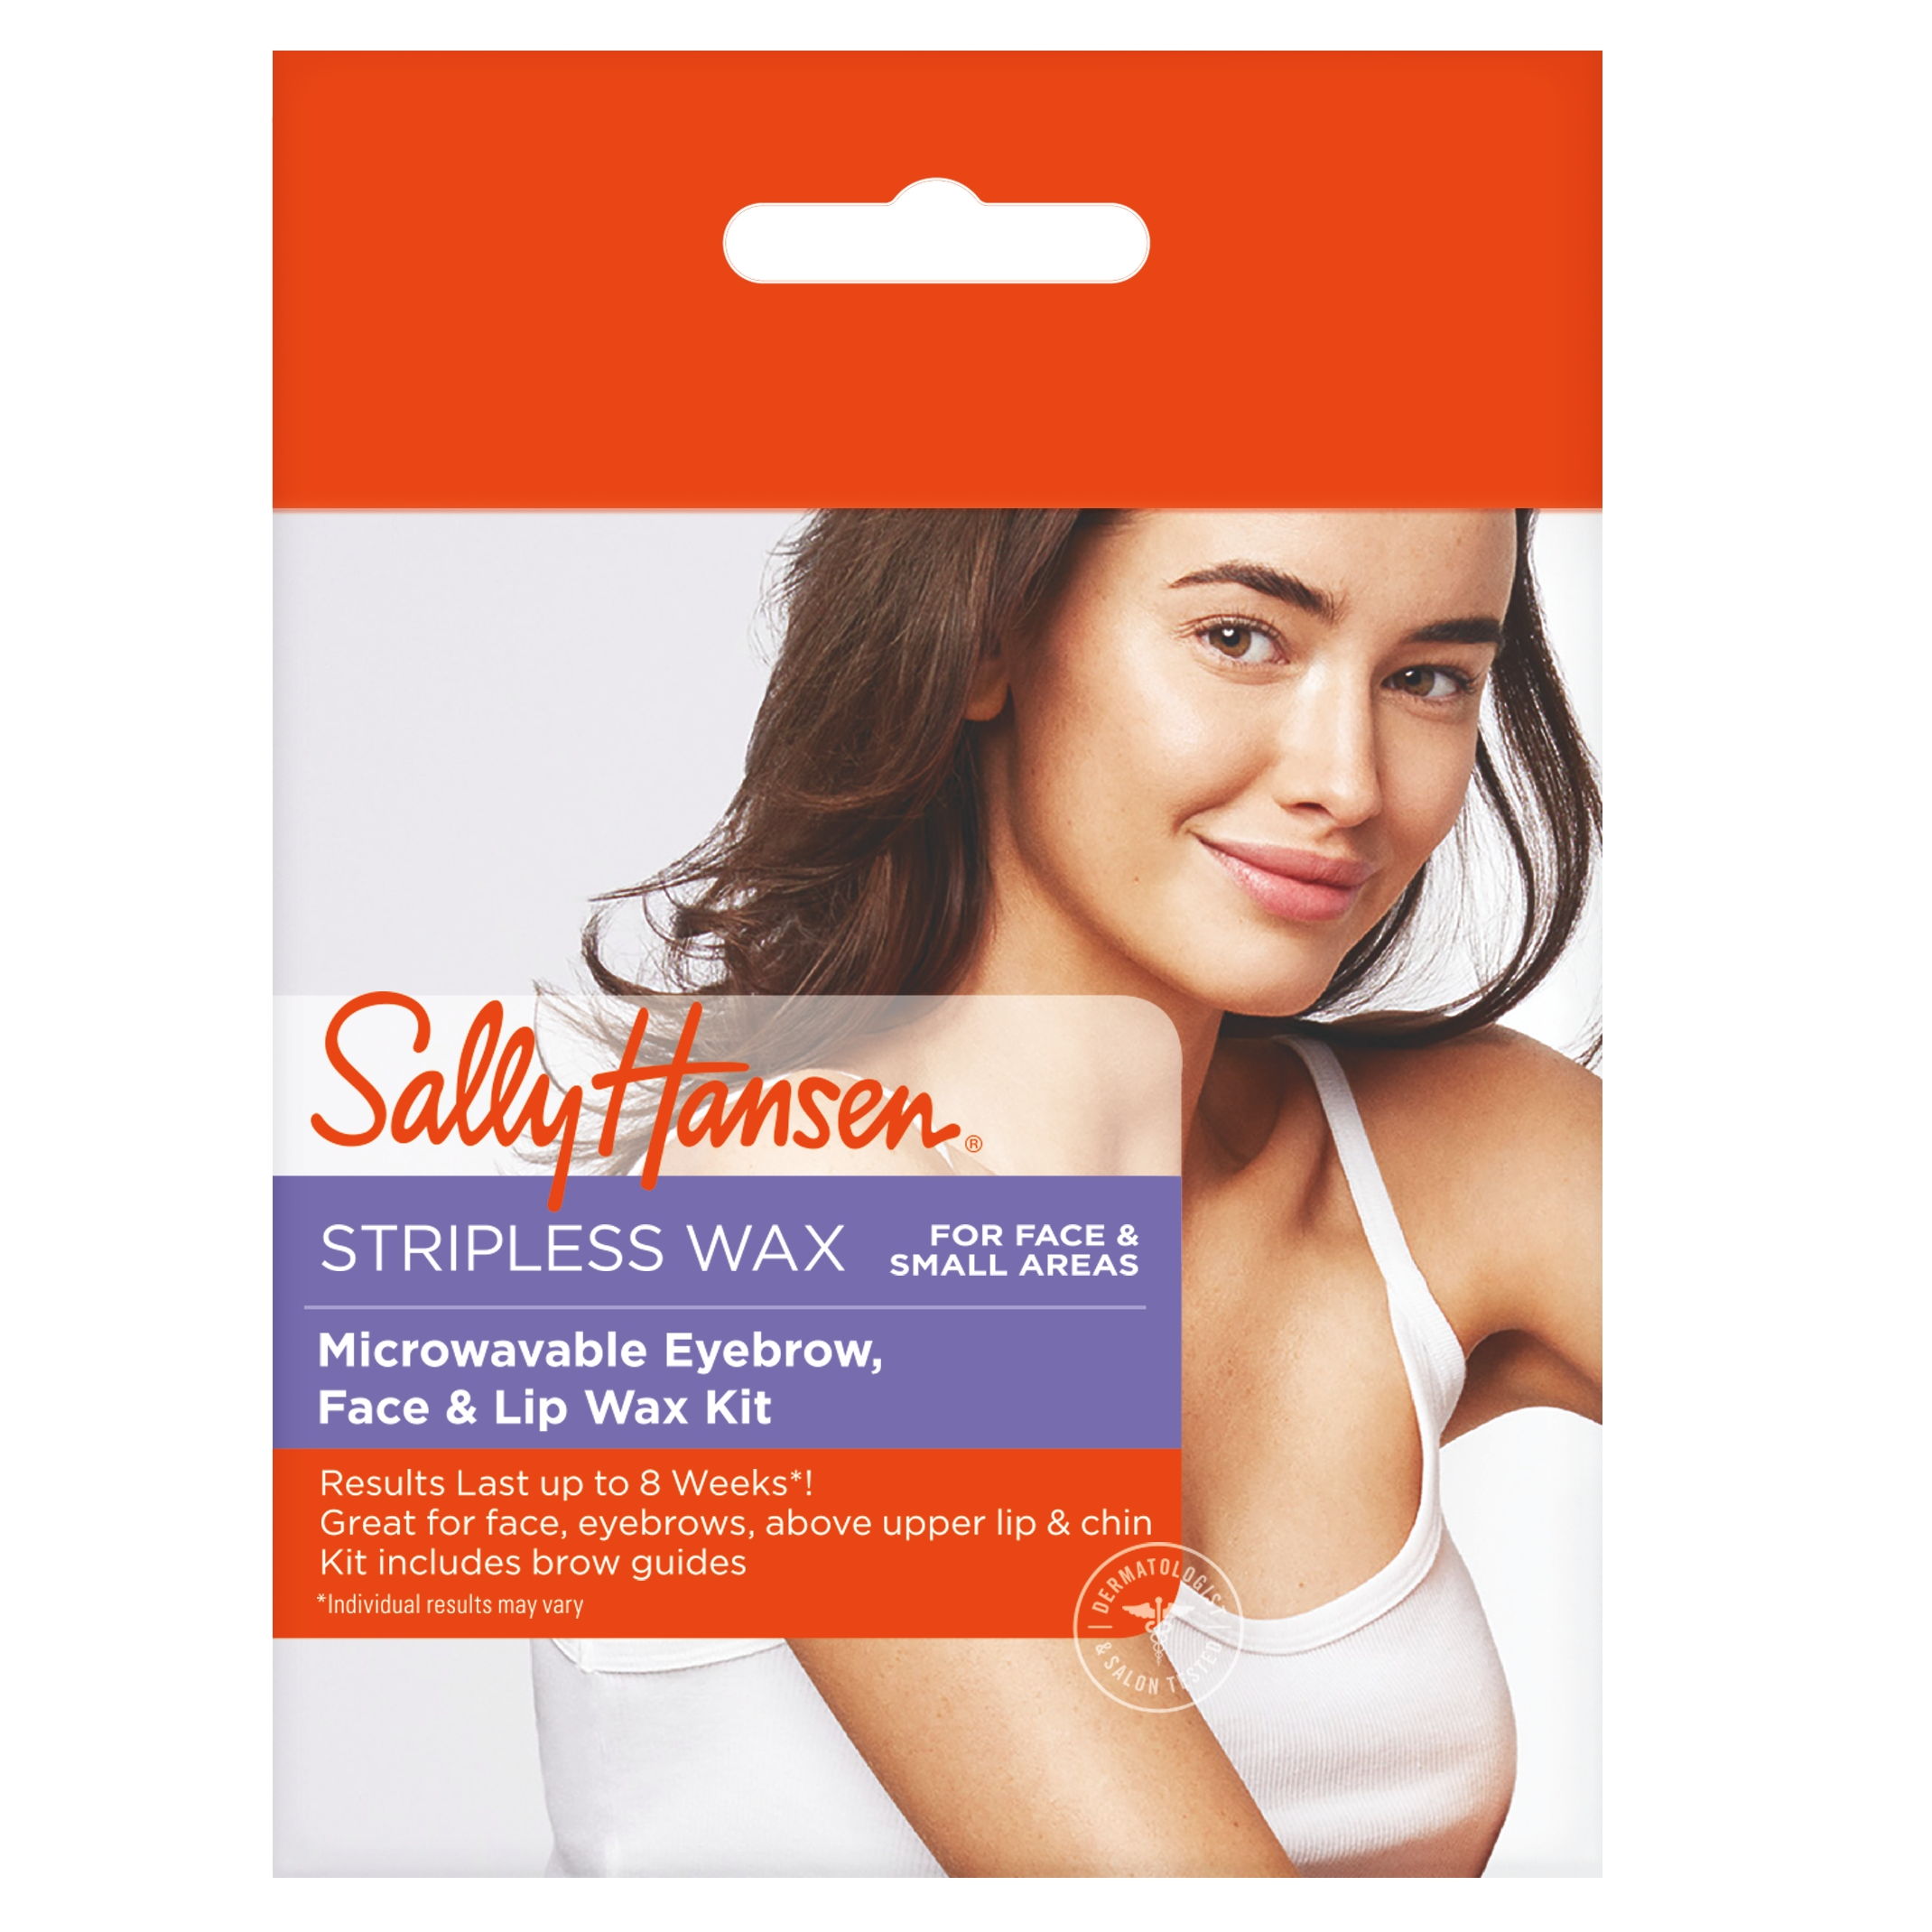 Sally Hansen Microwavable Eyebrow, Face & Lip Wax Kit, Effective and Easy to Use 0.31 Oz, - image 4 of 4